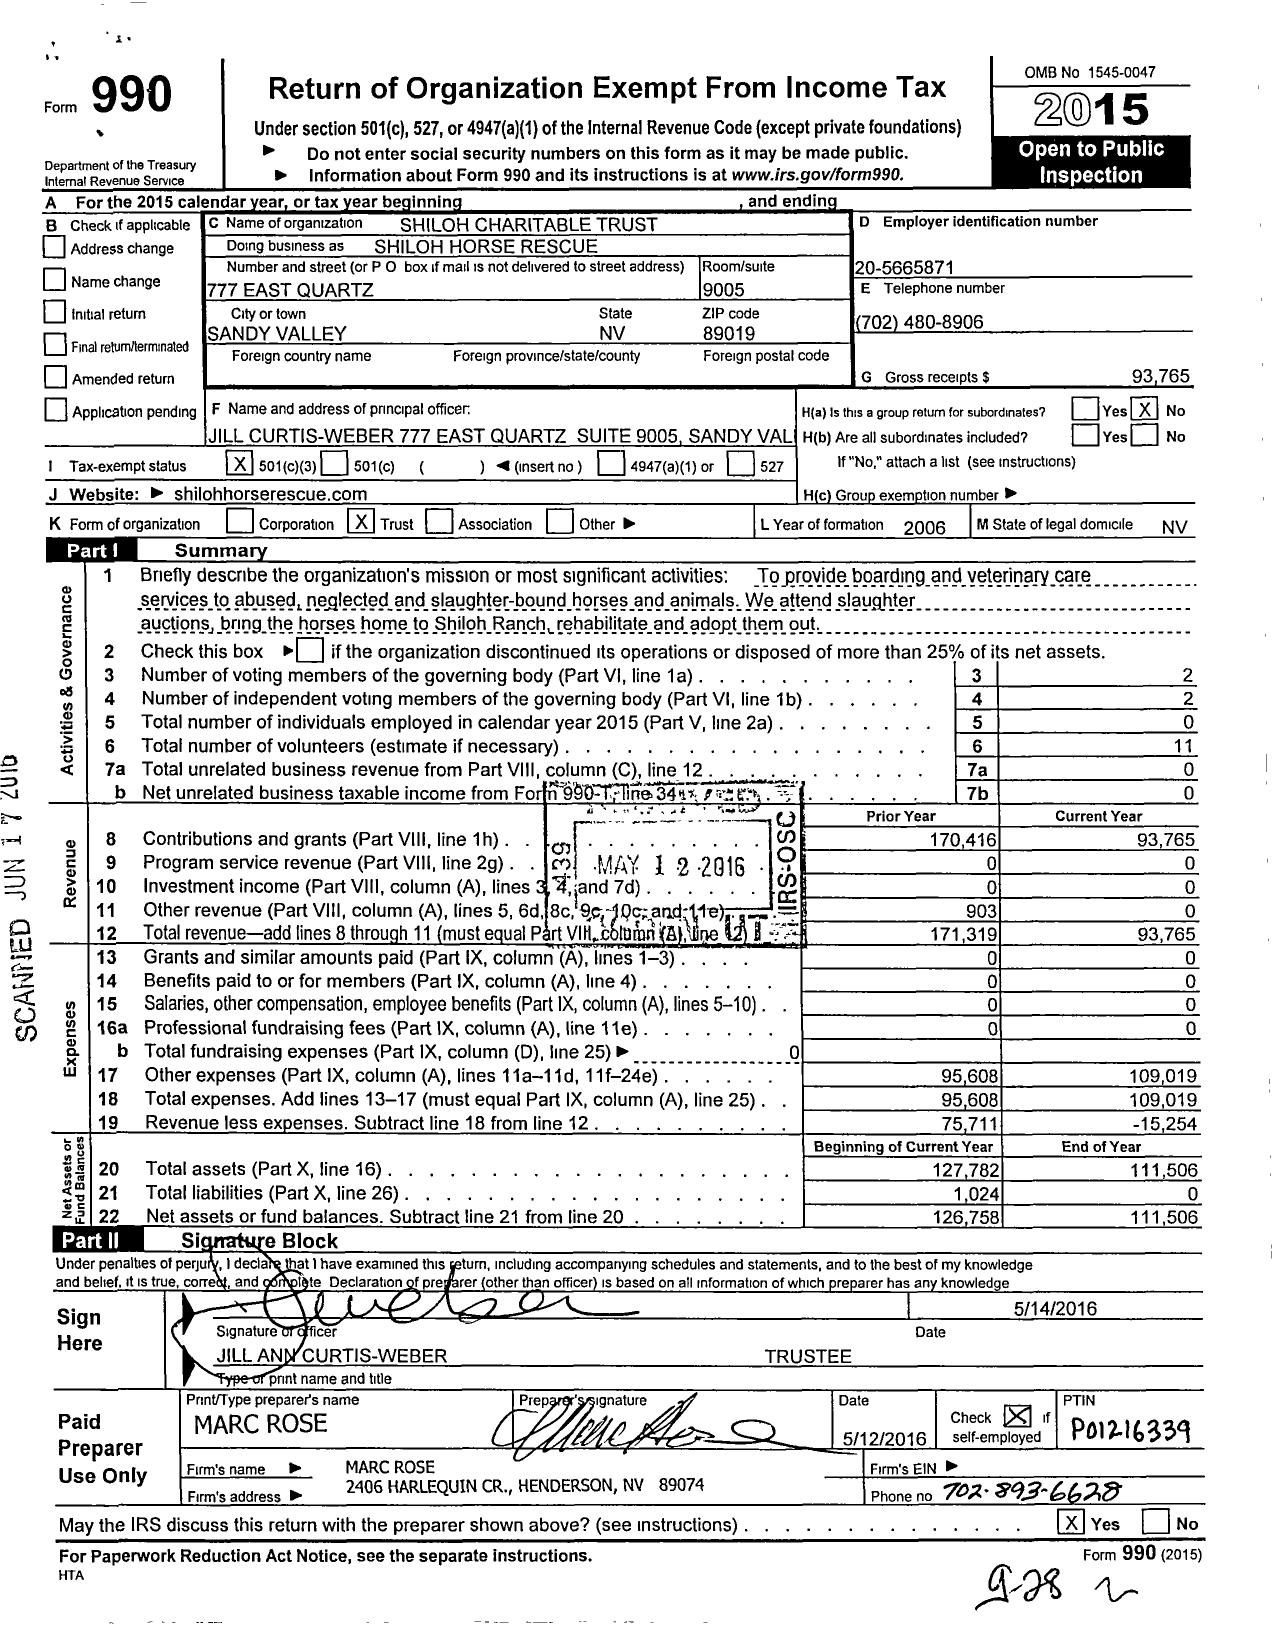 Image of first page of 2015 Form 990 for Shiloh Charitable Trust